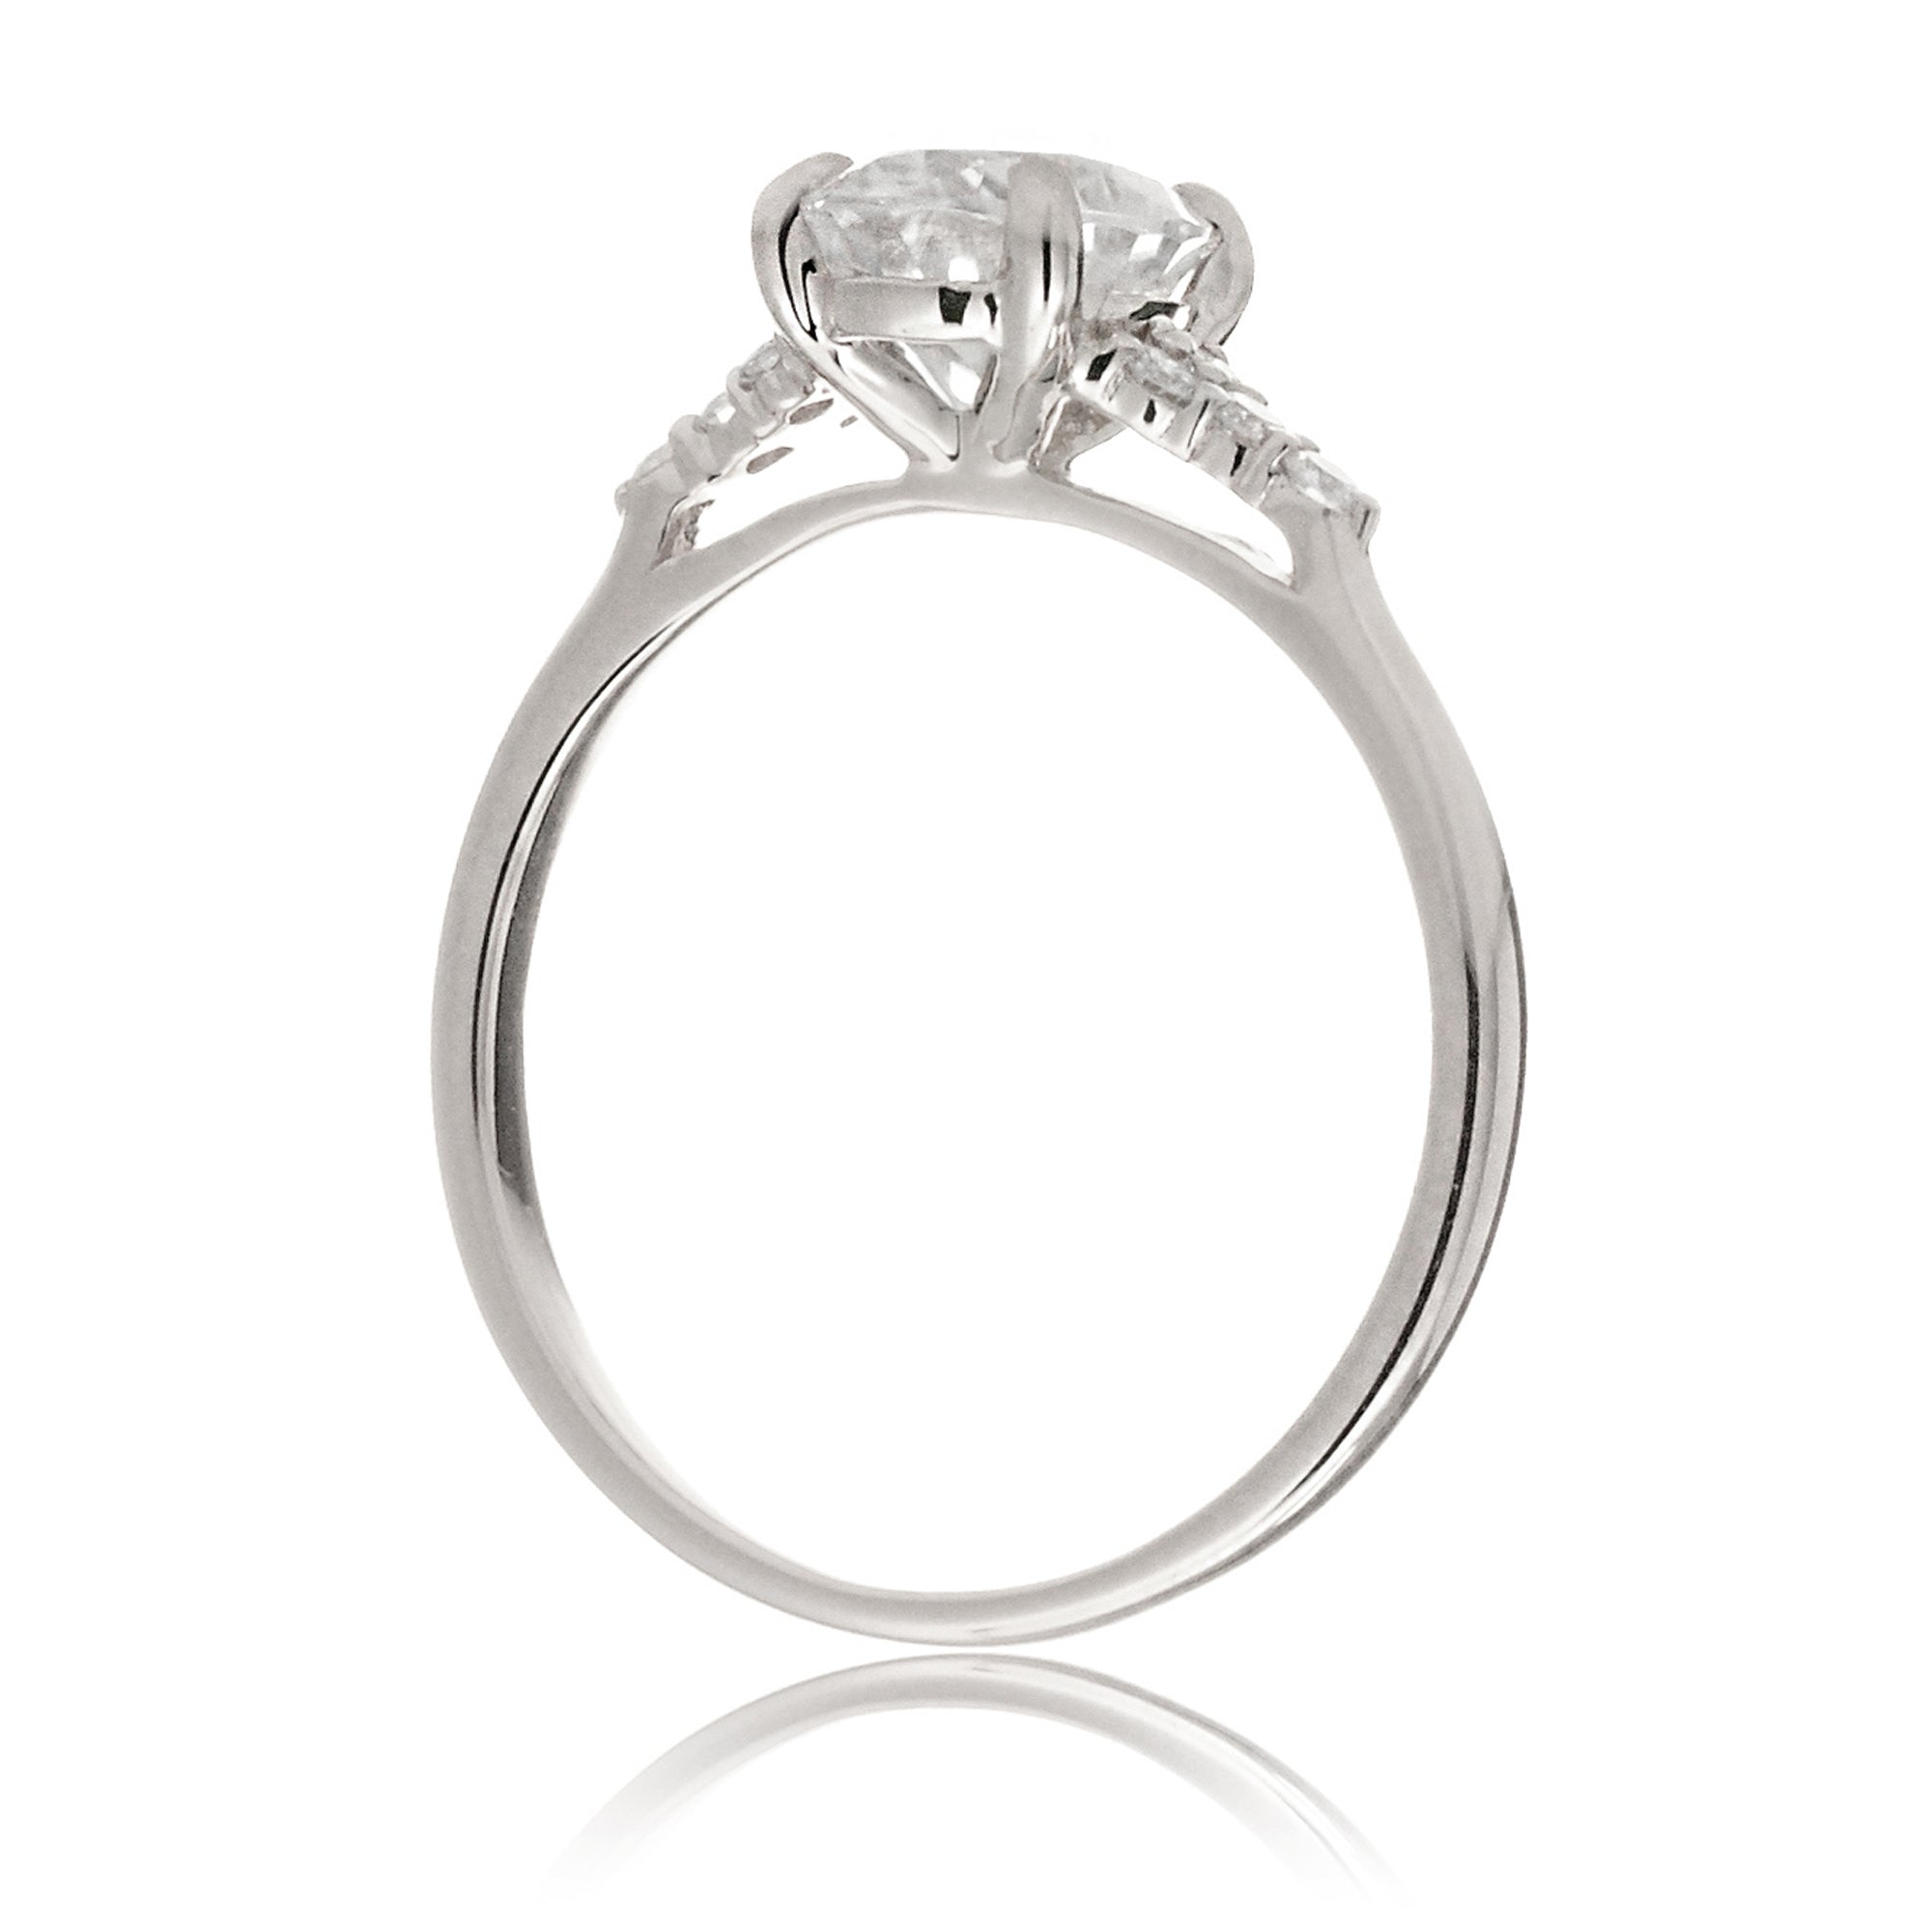 Pear shape diamond engagement ring in white gold - the Chloe